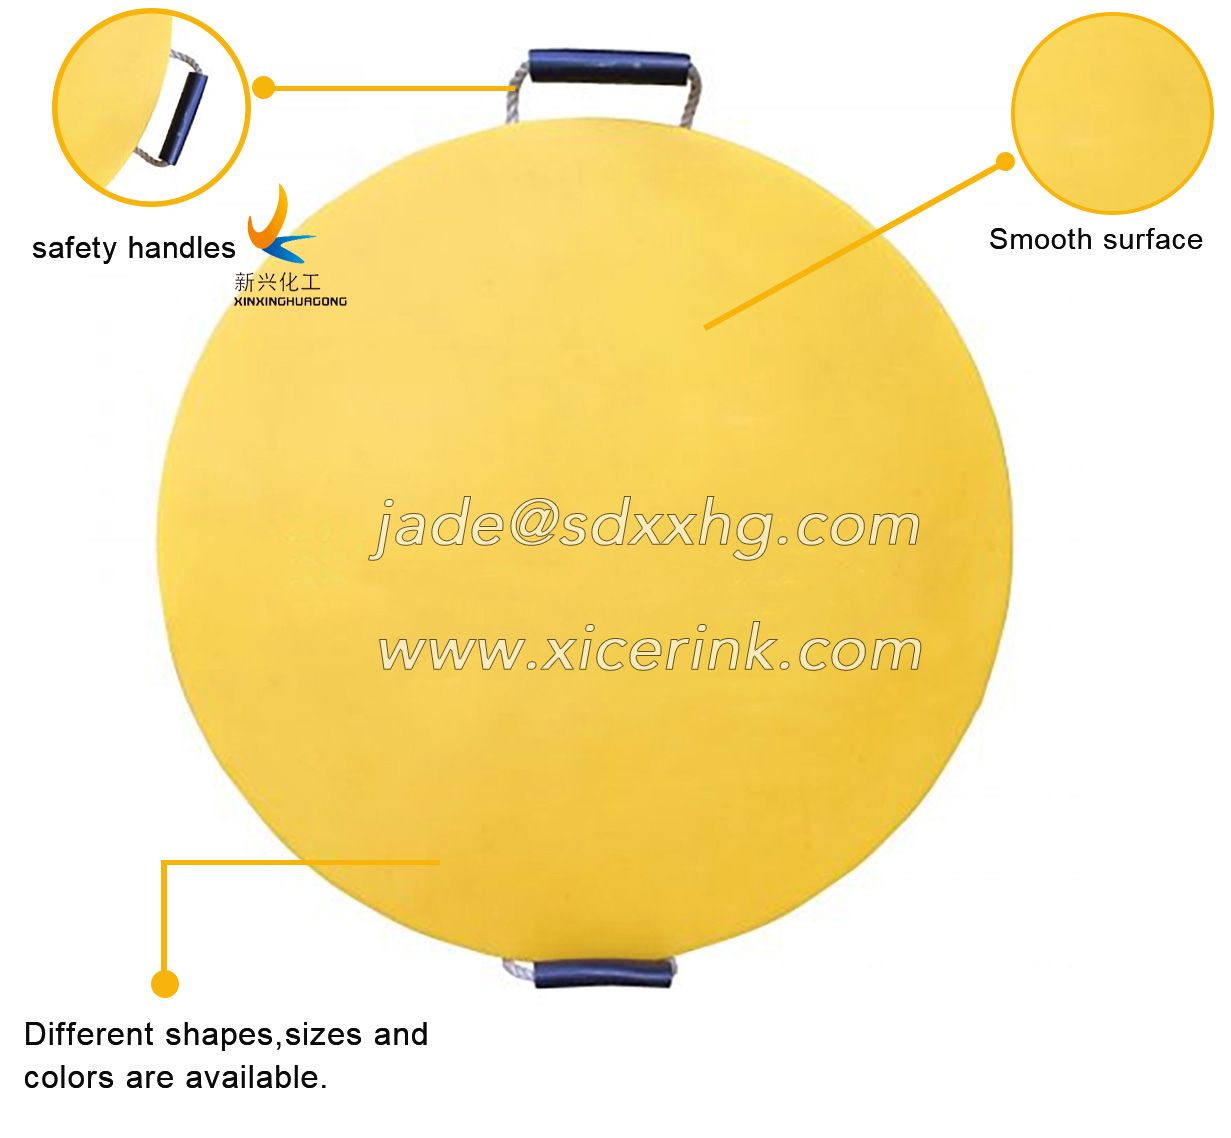 Manufacture of china 40mm 50mm 60mm uhmwpe outrigger pads for crane